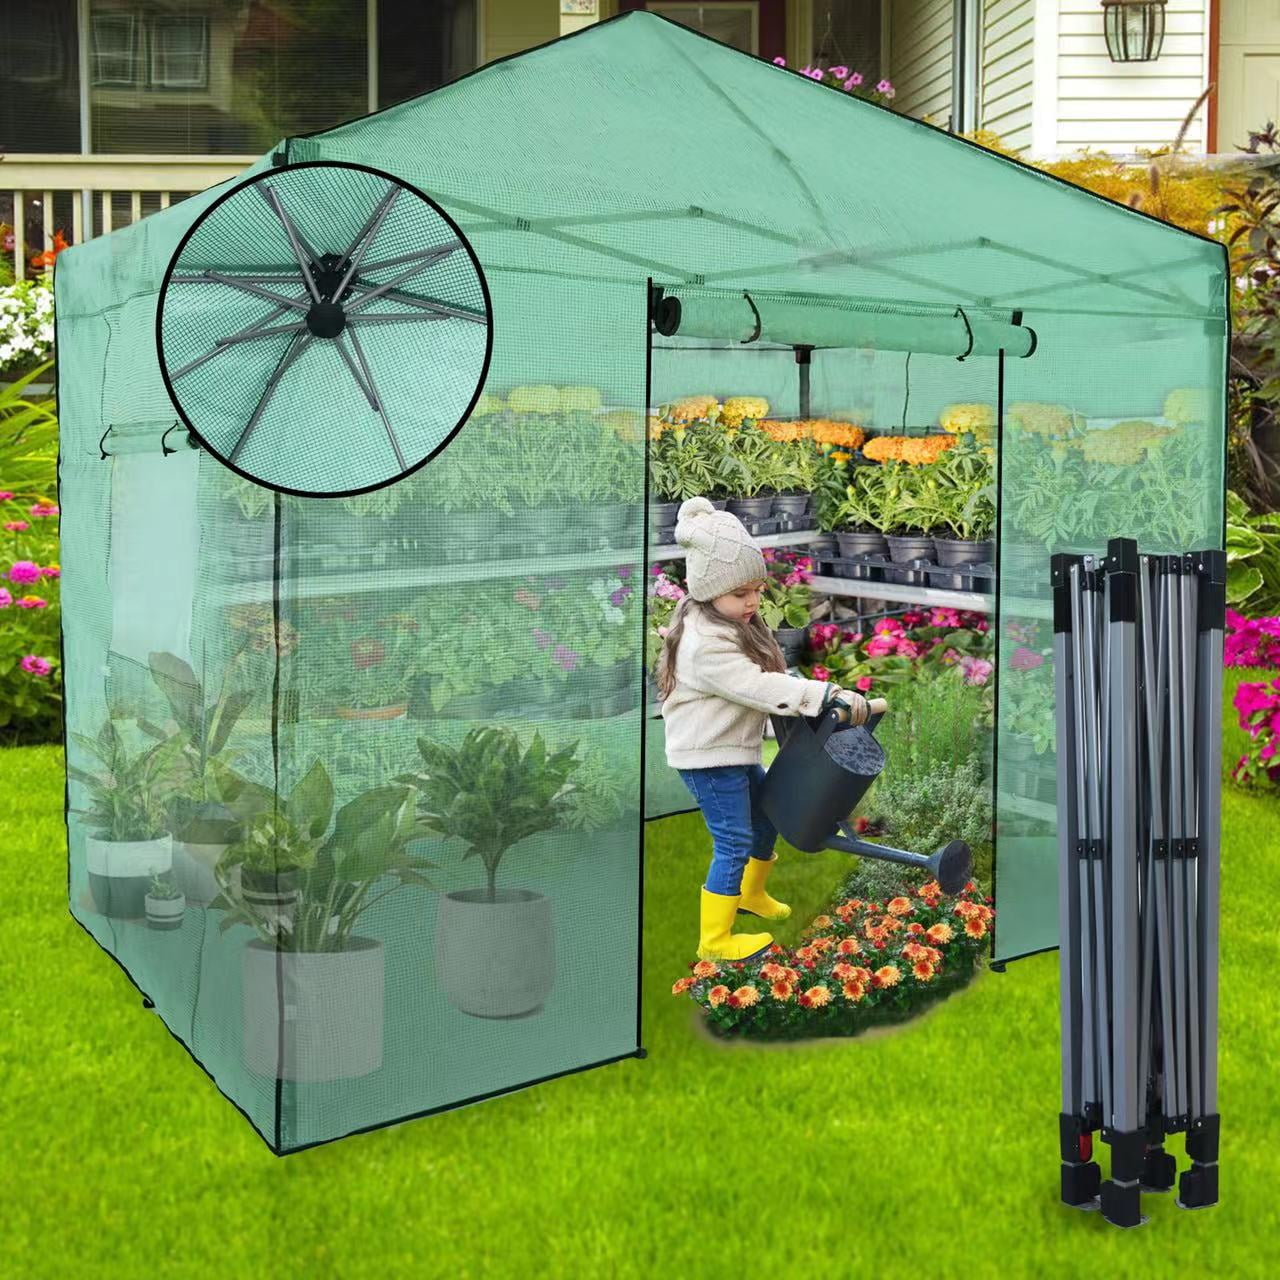 Tnfeeon Silver Reflective Film Garden Greenhouse Covering Foil Environmentally Safe Sheets Increase Growth for Vegetables Flowers 